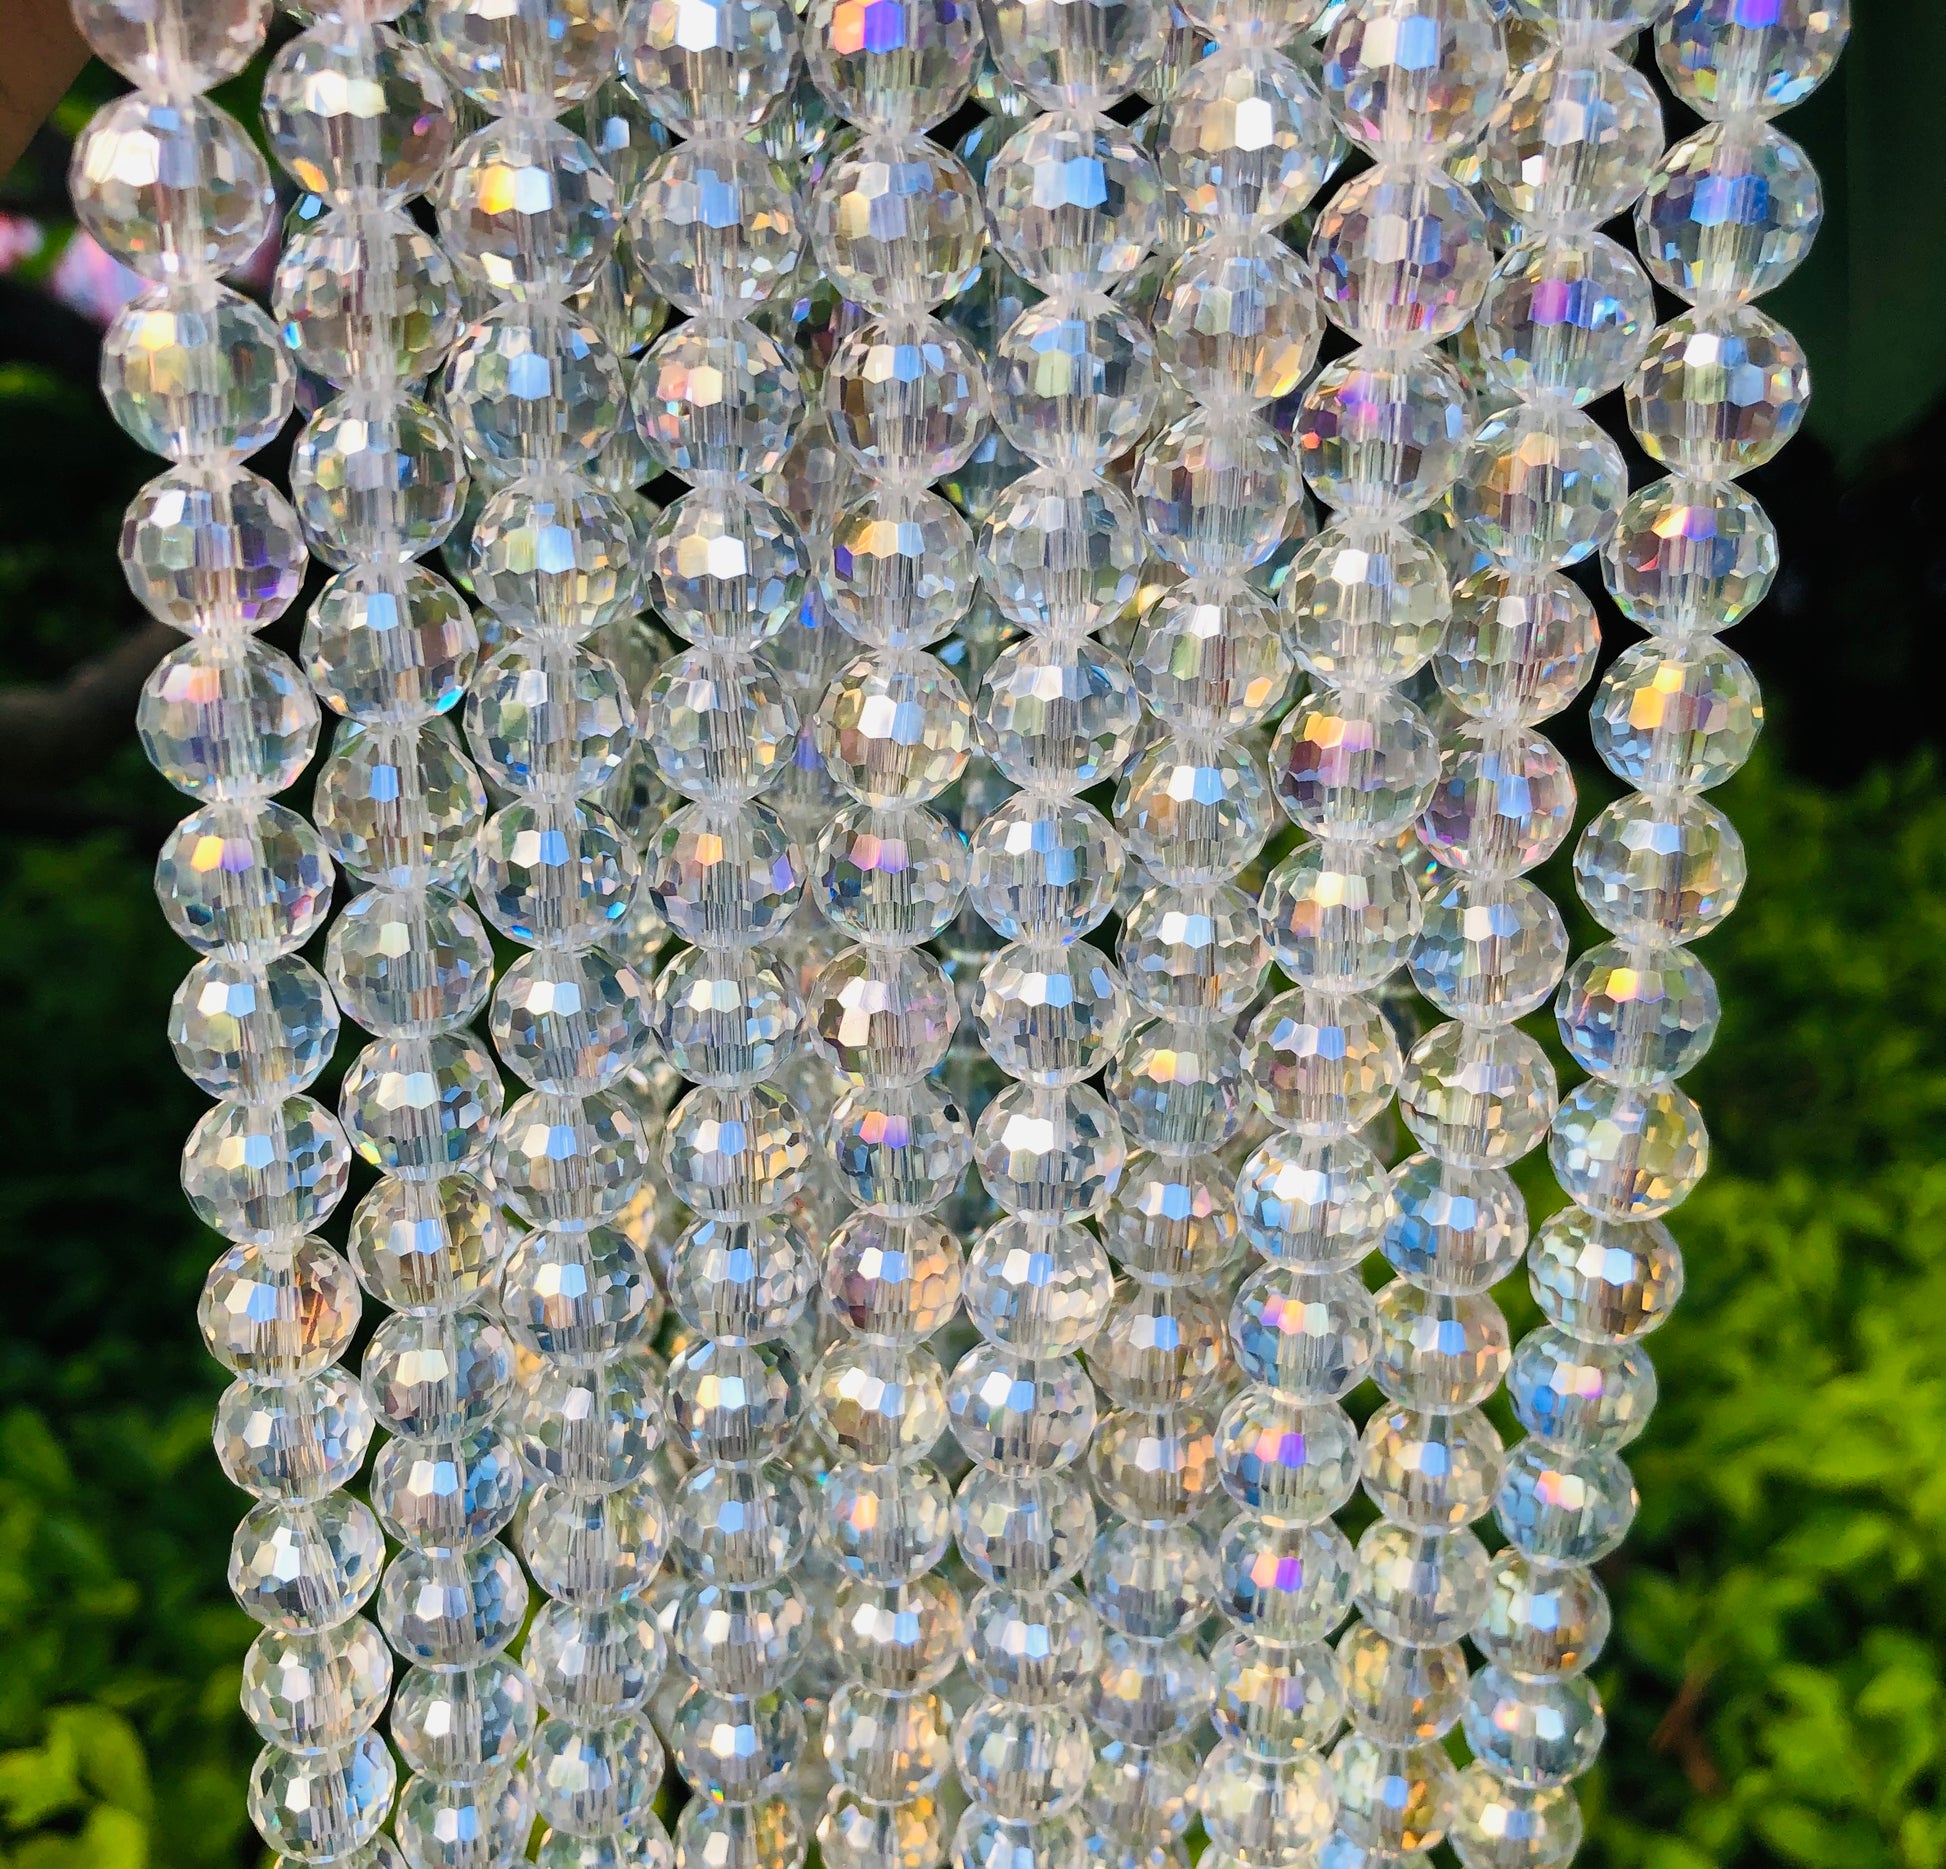 2 Strands/lot 10mm Clear AB 96 Faceted Glass Beads Glass Beads Faceted Glass Beads Charms Beads Beyond